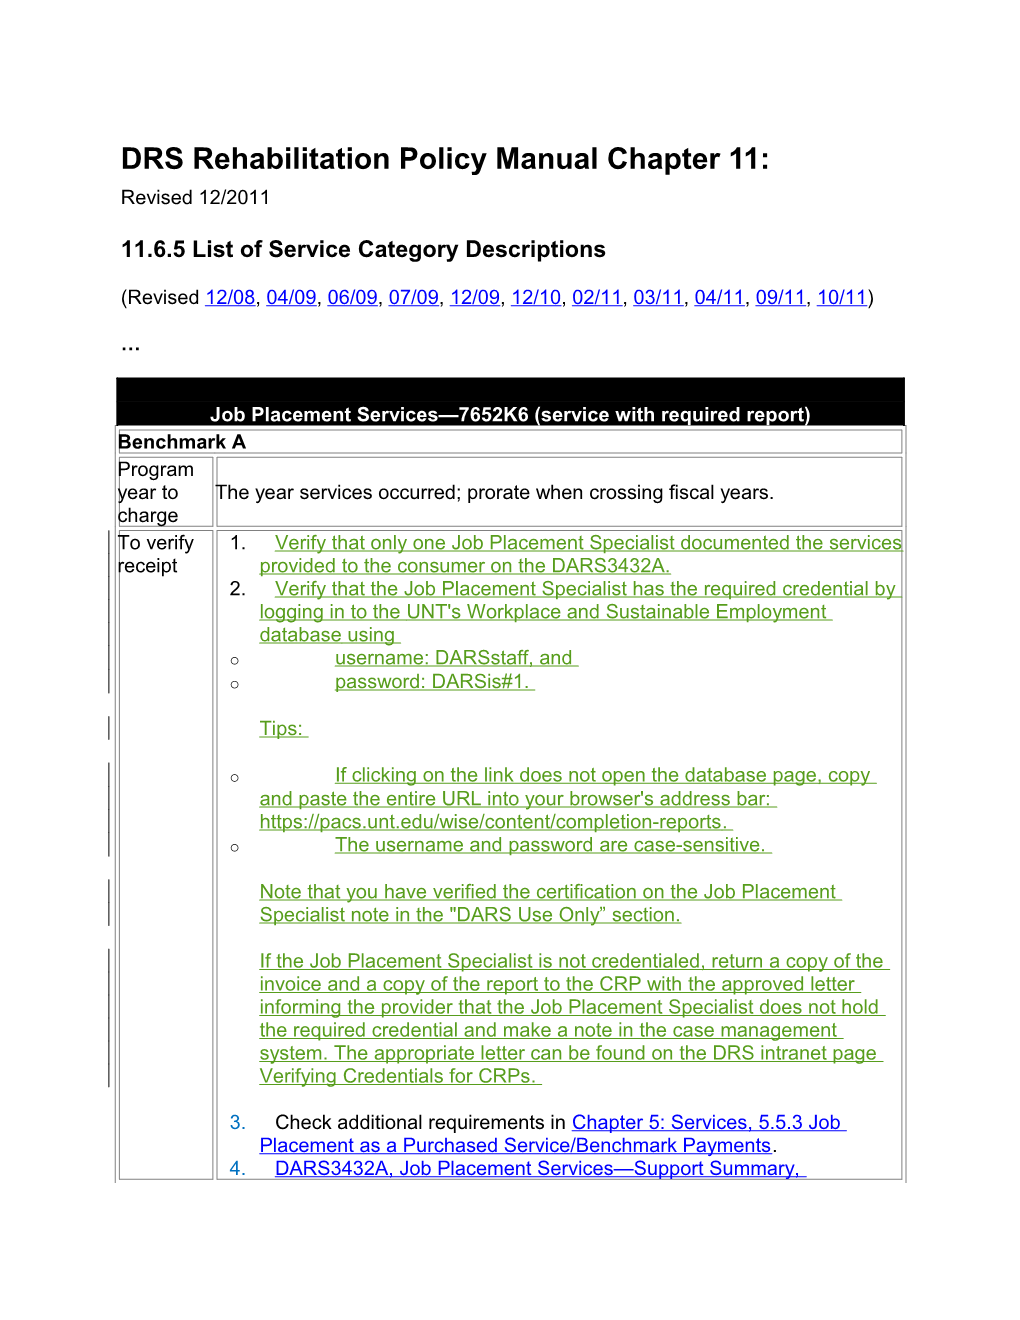 DRS Rehabilitation Policy Manual Chapter 11 Revisions, December 2011